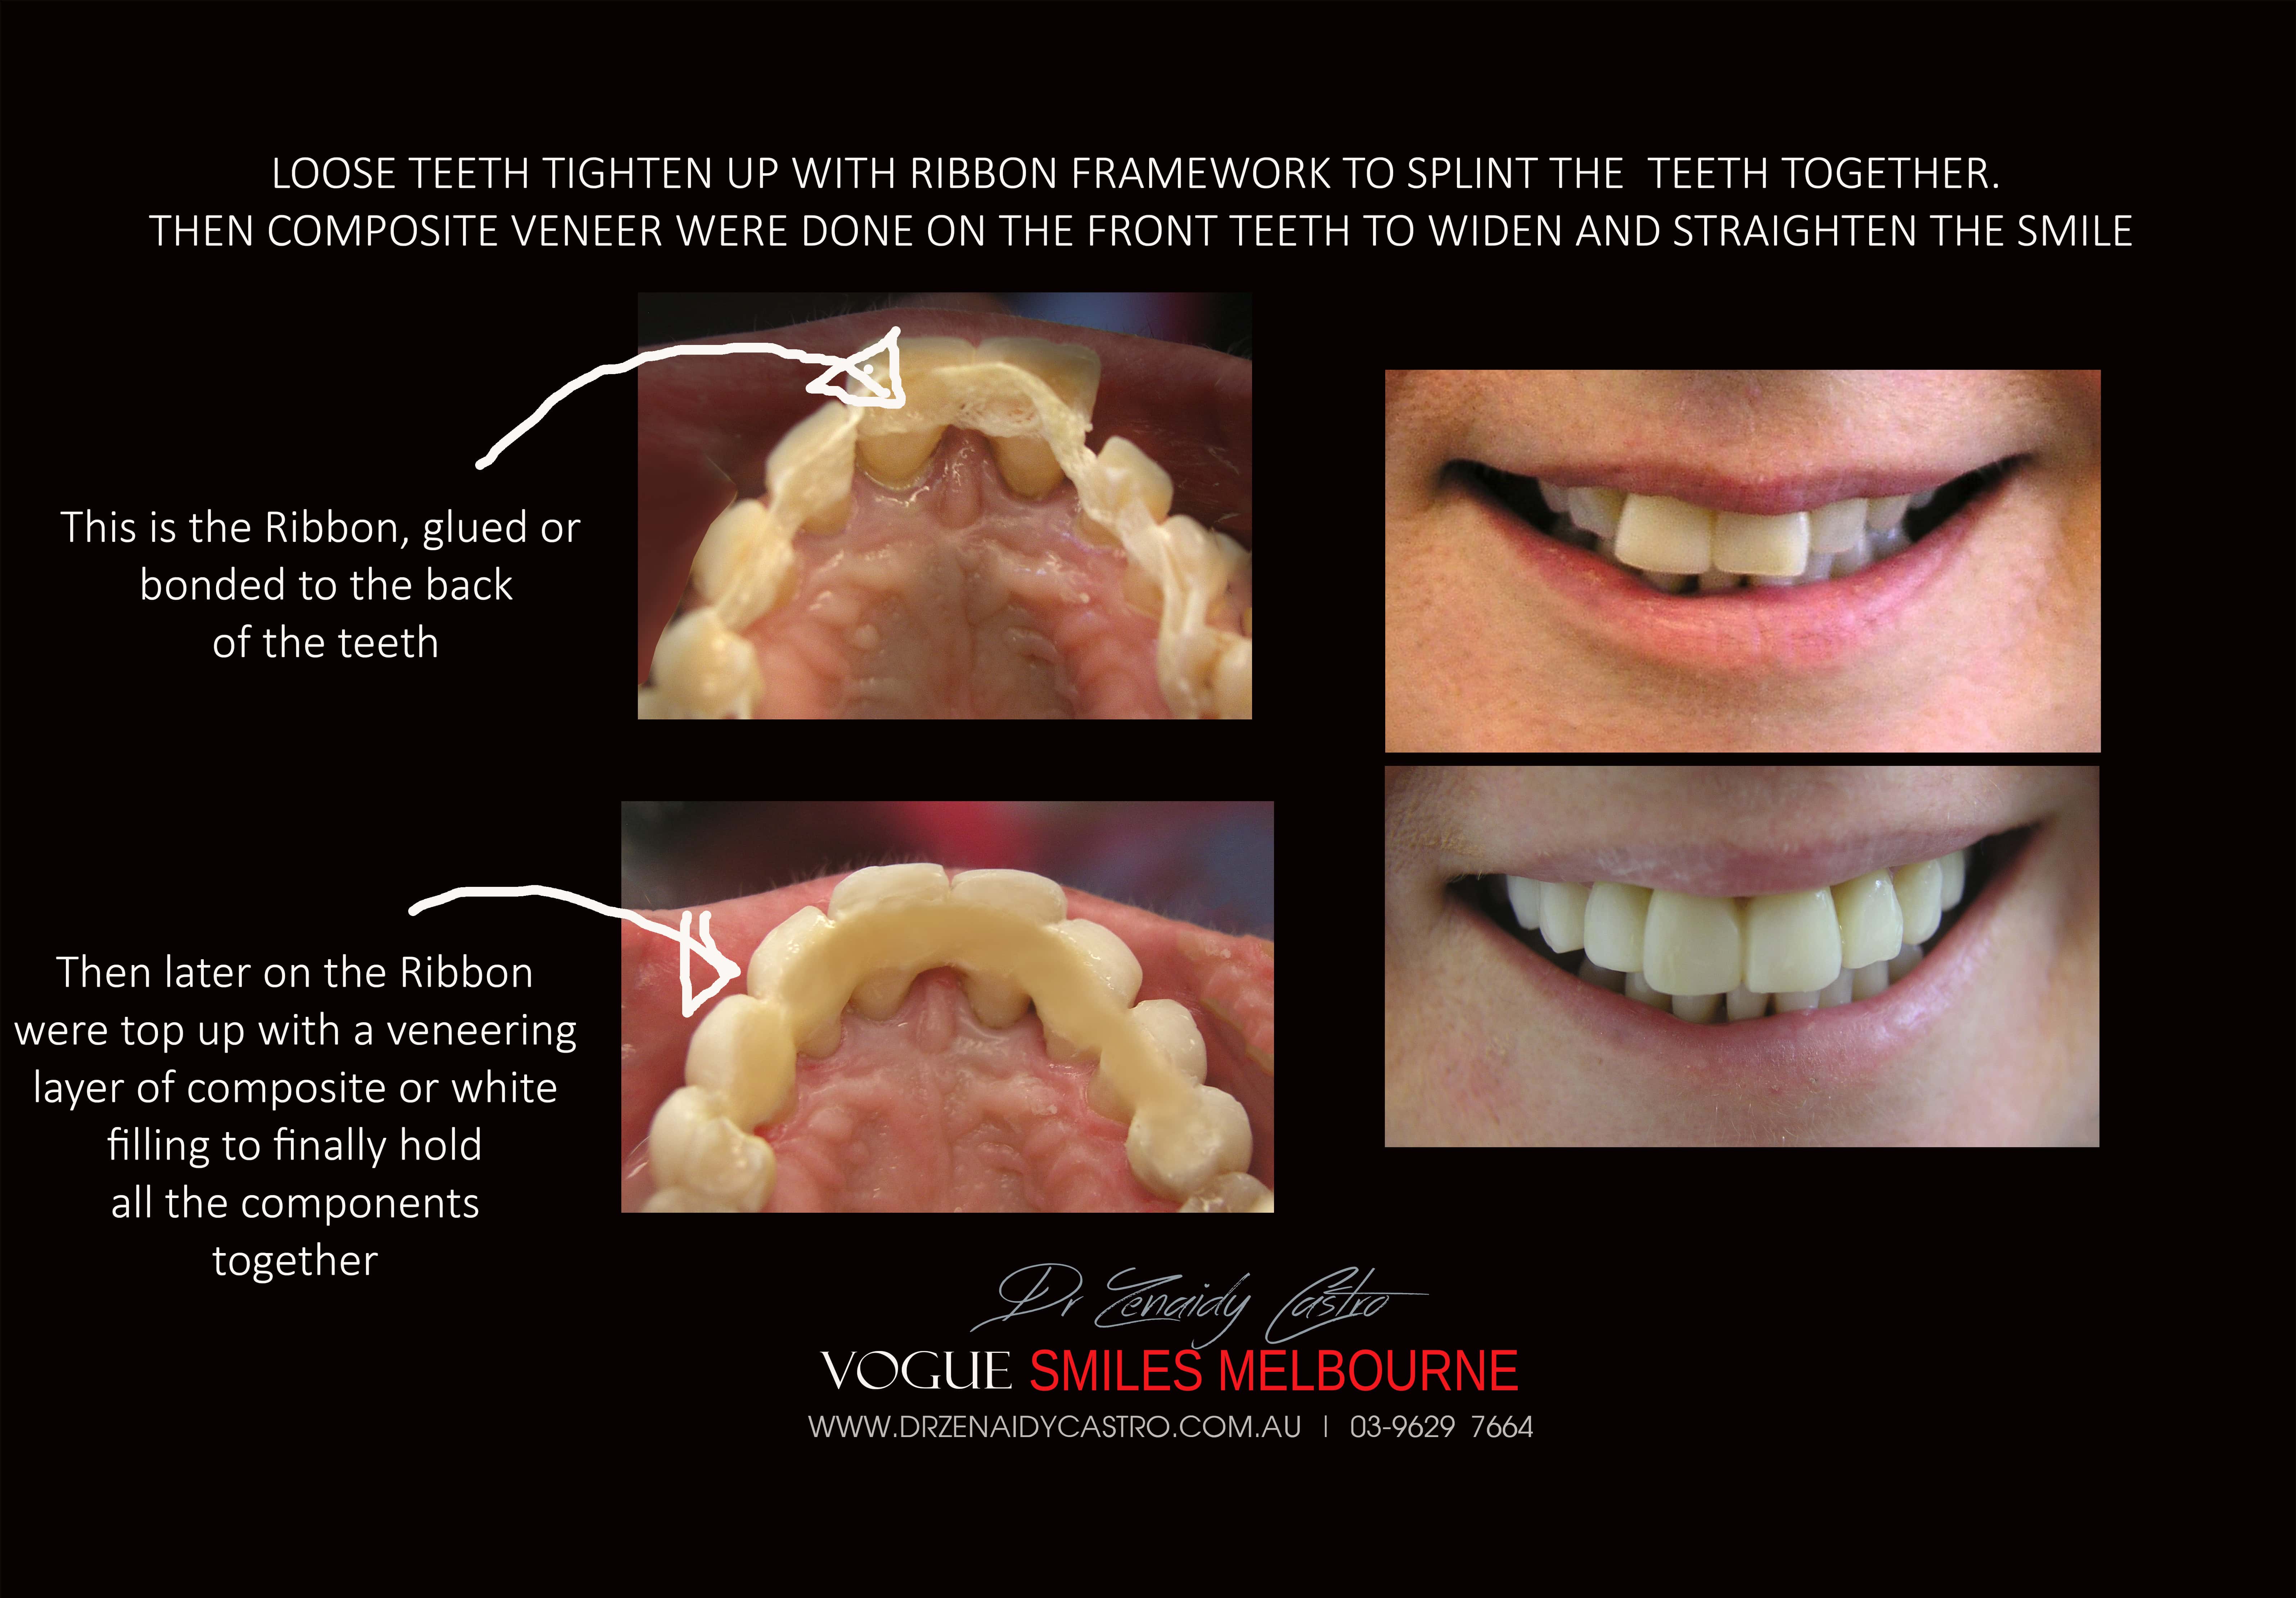 Replace Teeth Instantly - Affordable Same Day Smile Solution Melbourne -Intermediate smile Makeover Solution